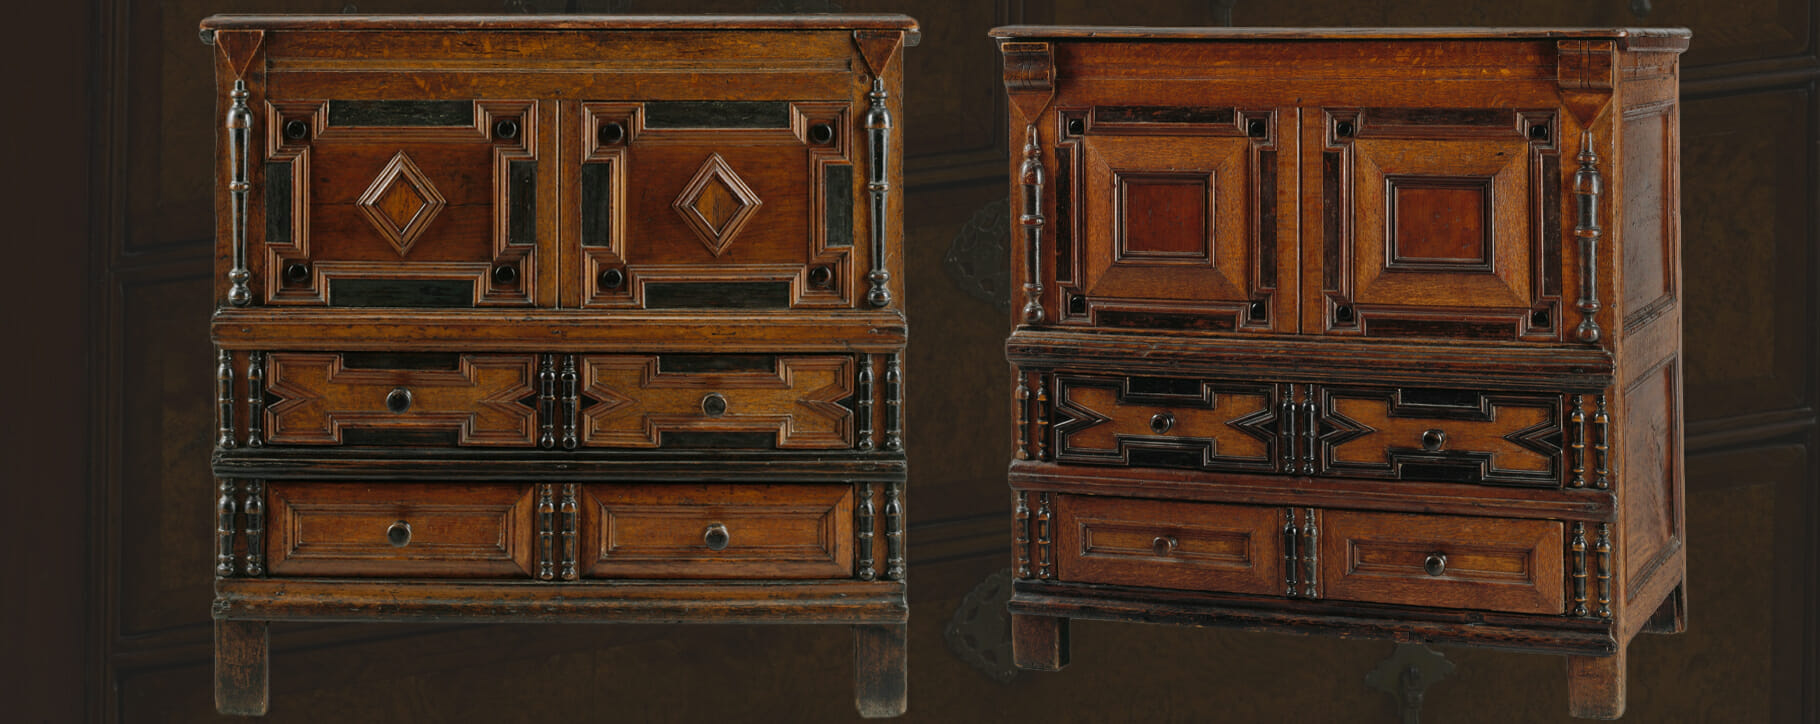 17th century chest of drawers